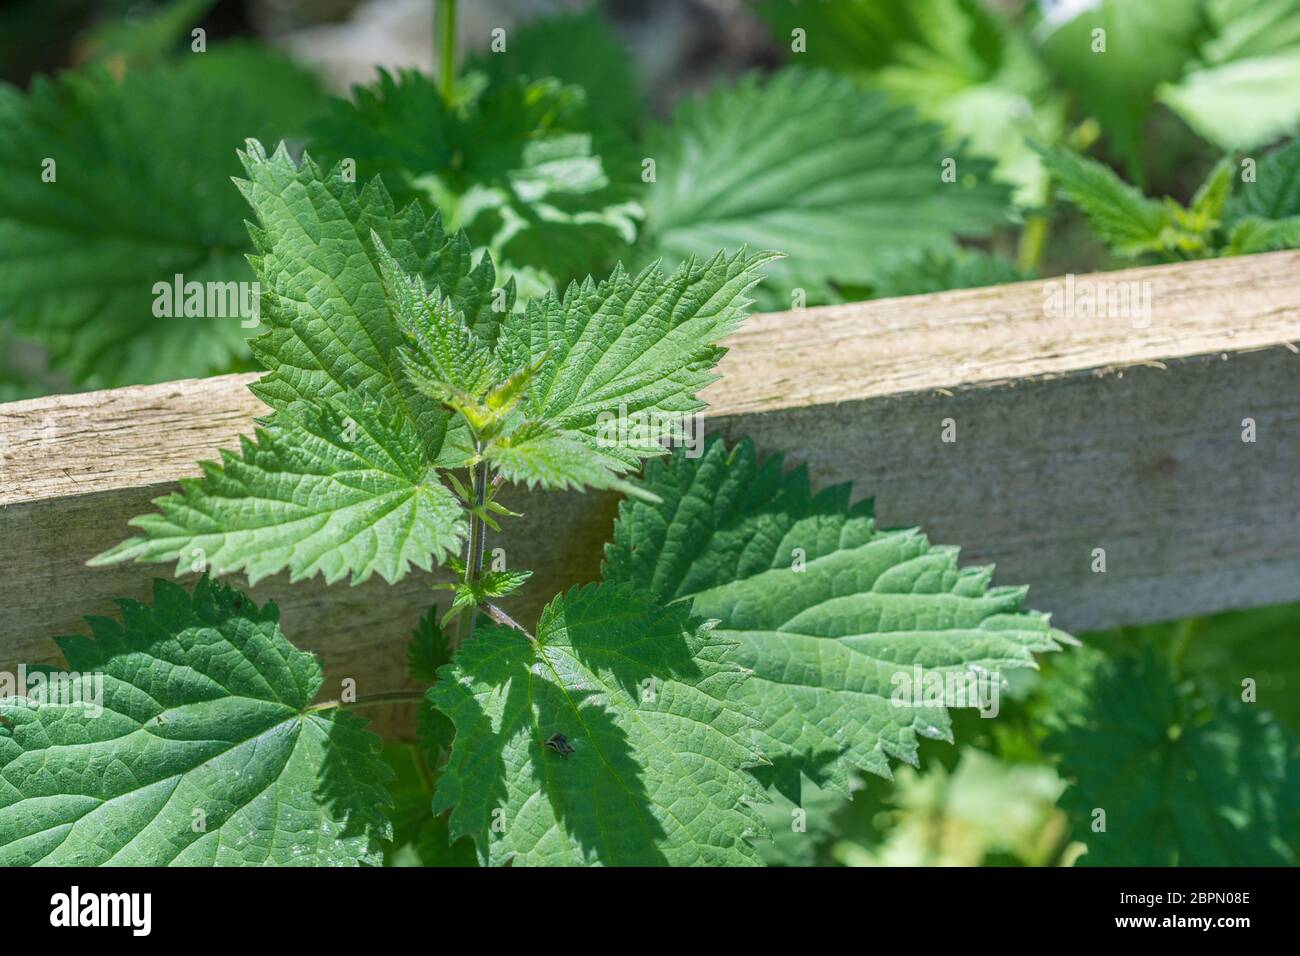 Leaves of common Stinging Nettle / Urtica dioica in dappled sun. Well-known foraged food for nettle soup & spinach substitute. Painful sting concept. Stock Photo